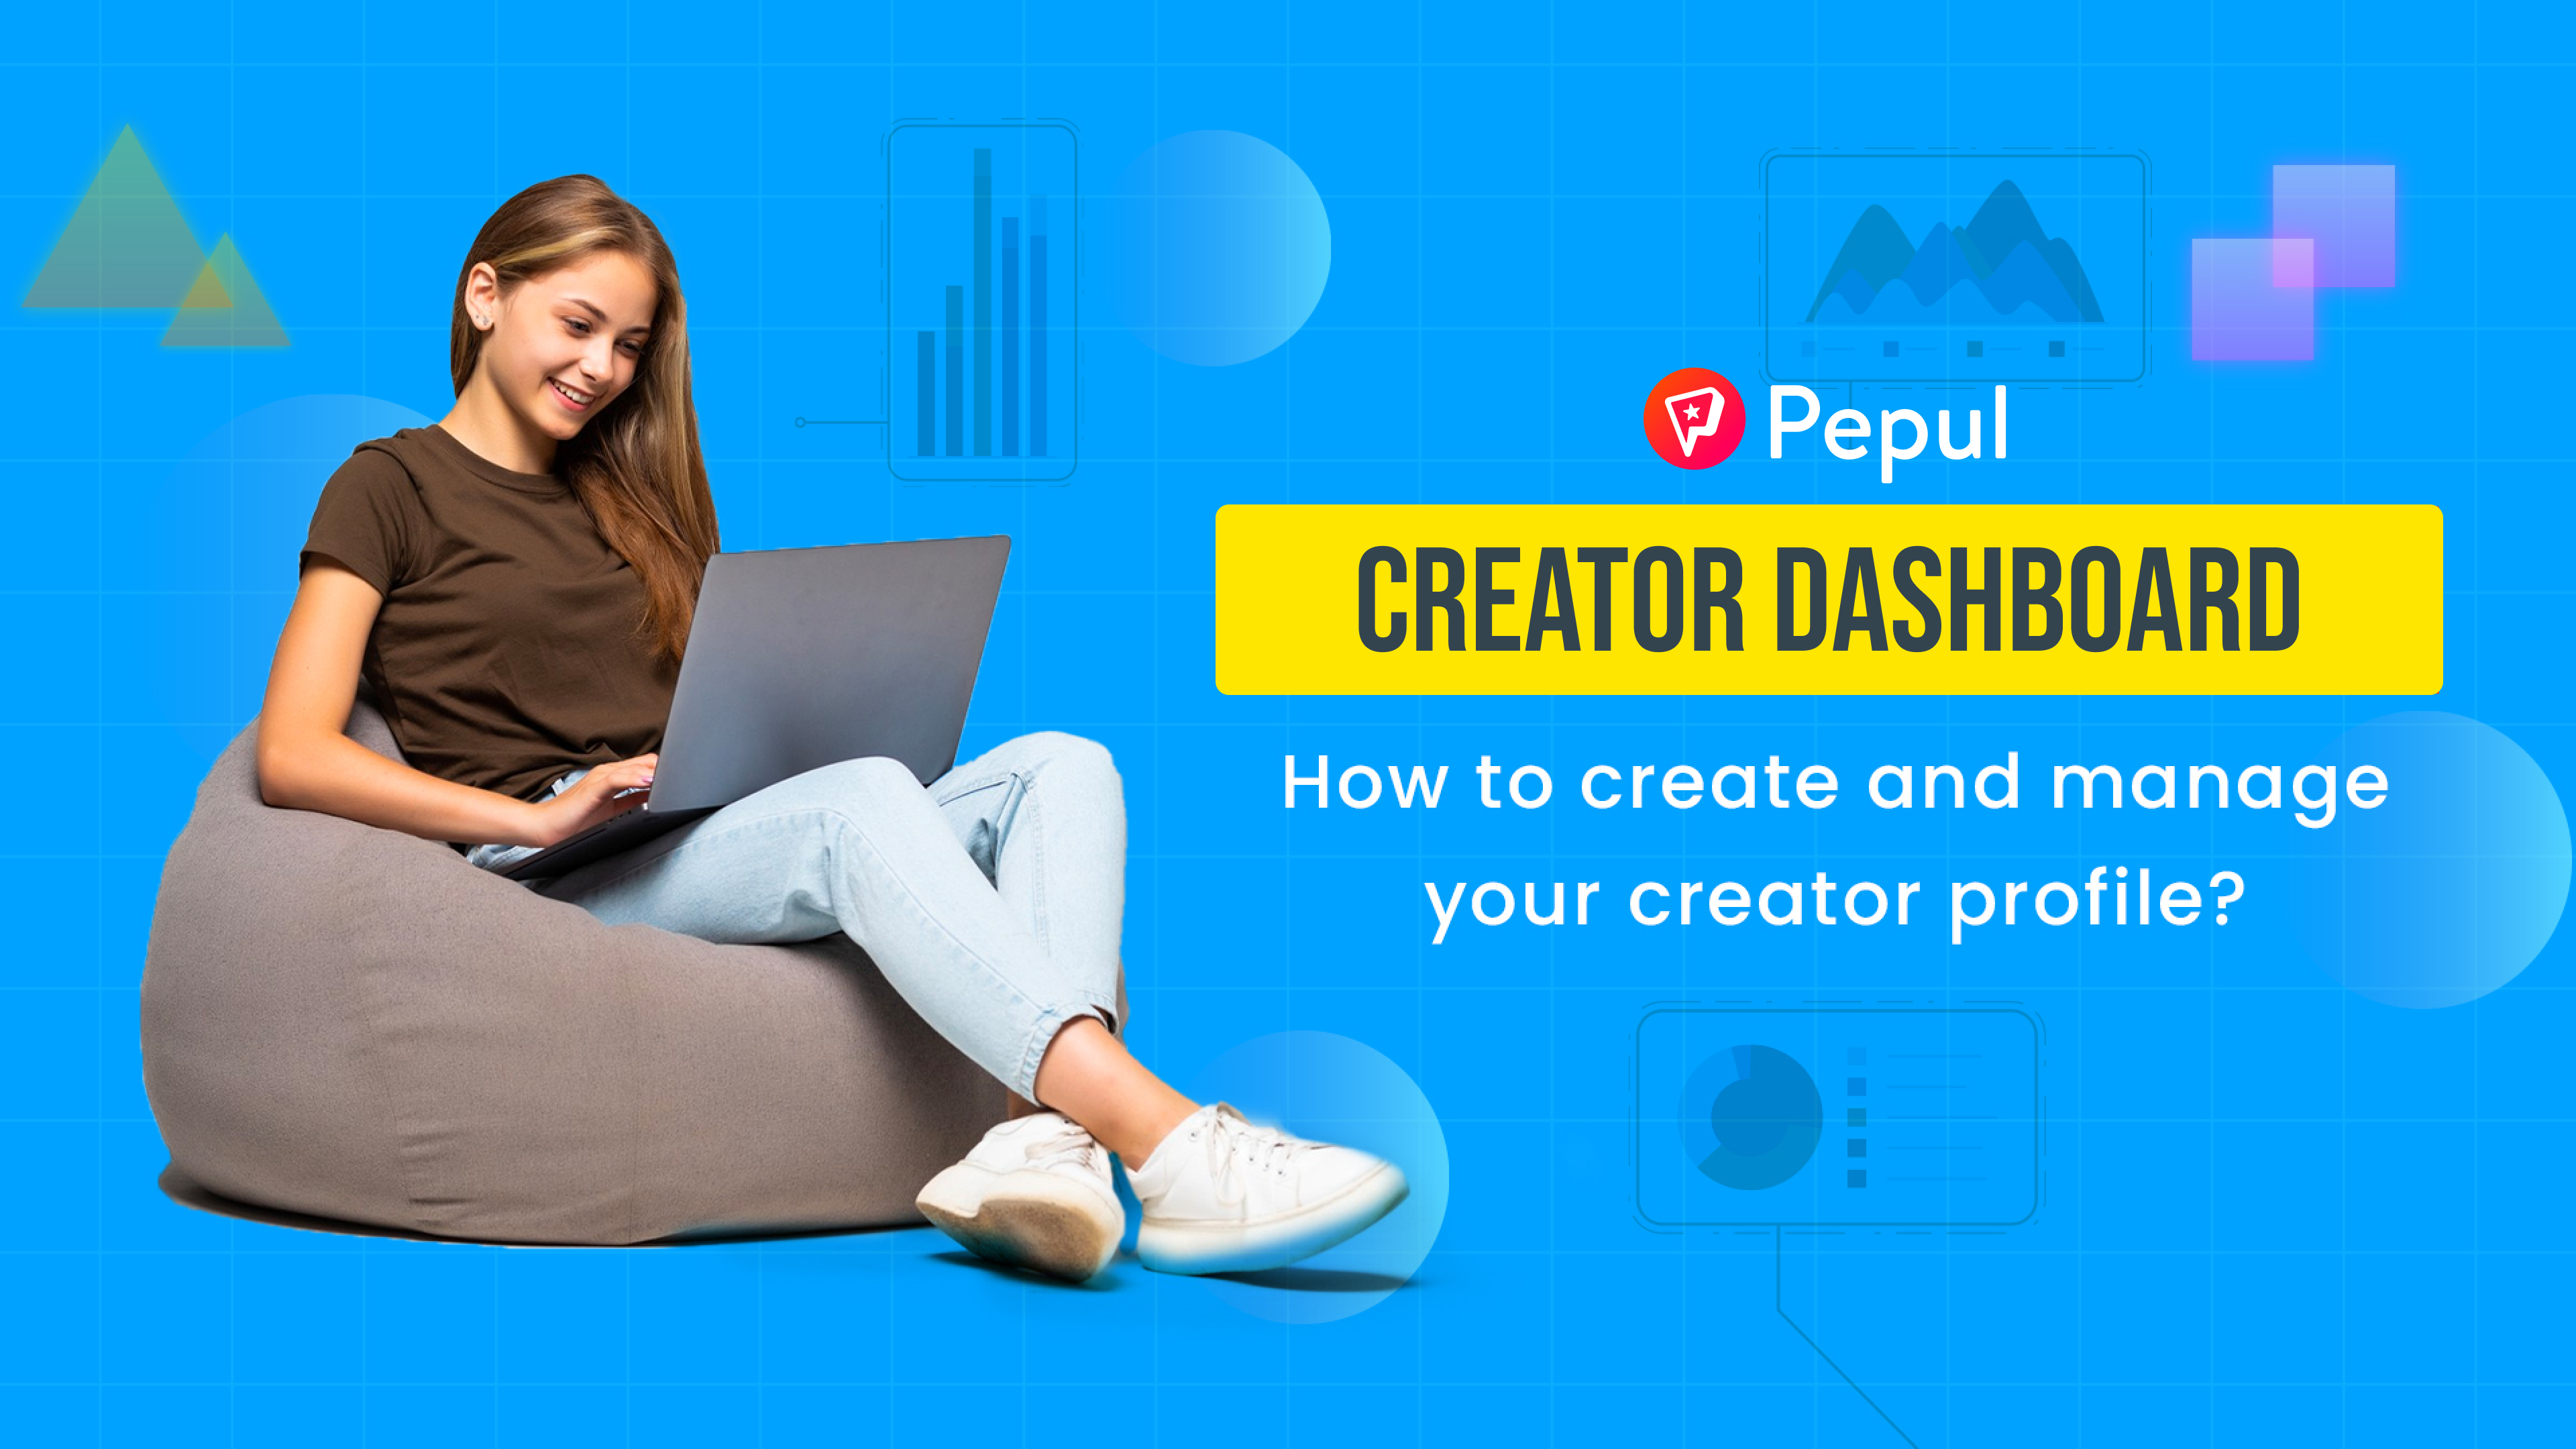 Creator Dashboard: How to create your creator profile and upload videos